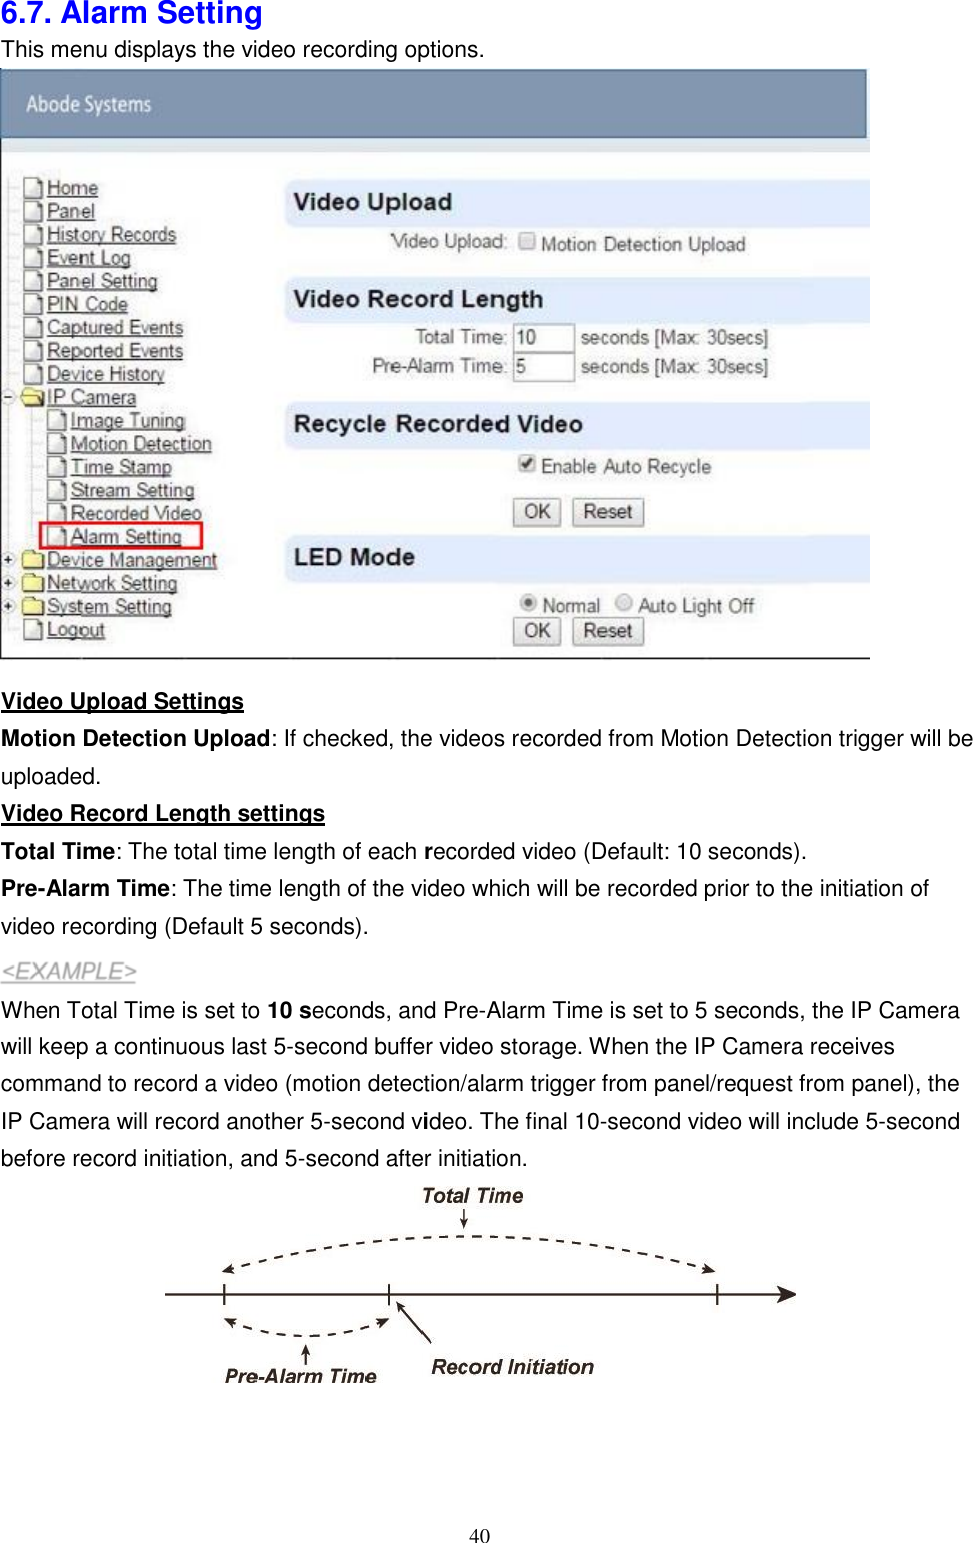 40  P 6.7. Alarm Setting This menu displays the video recording options.   Video Upload Settings Motion Detection Upload: If checked, the videos recorded from Motion Detection trigger will be uploaded. Video Record Length settings Total Time: The total time length of each recorded video (Default: 10 seconds). Pre-Alarm Time: The time length of the video which will be recorded prior to the initiation of video recording (Default 5 seconds).  When Total Time is set to 10 seconds, and Pre-Alarm Time is set to 5 seconds, the IP Camera will keep a continuous last 5-second buffer video storage. When the IP Camera receives command to record a video (motion detection/alarm trigger from panel/request from panel), the IP Camera will record another 5-second video. The final 10-second video will include 5-second before record initiation, and 5-second after initiation.  